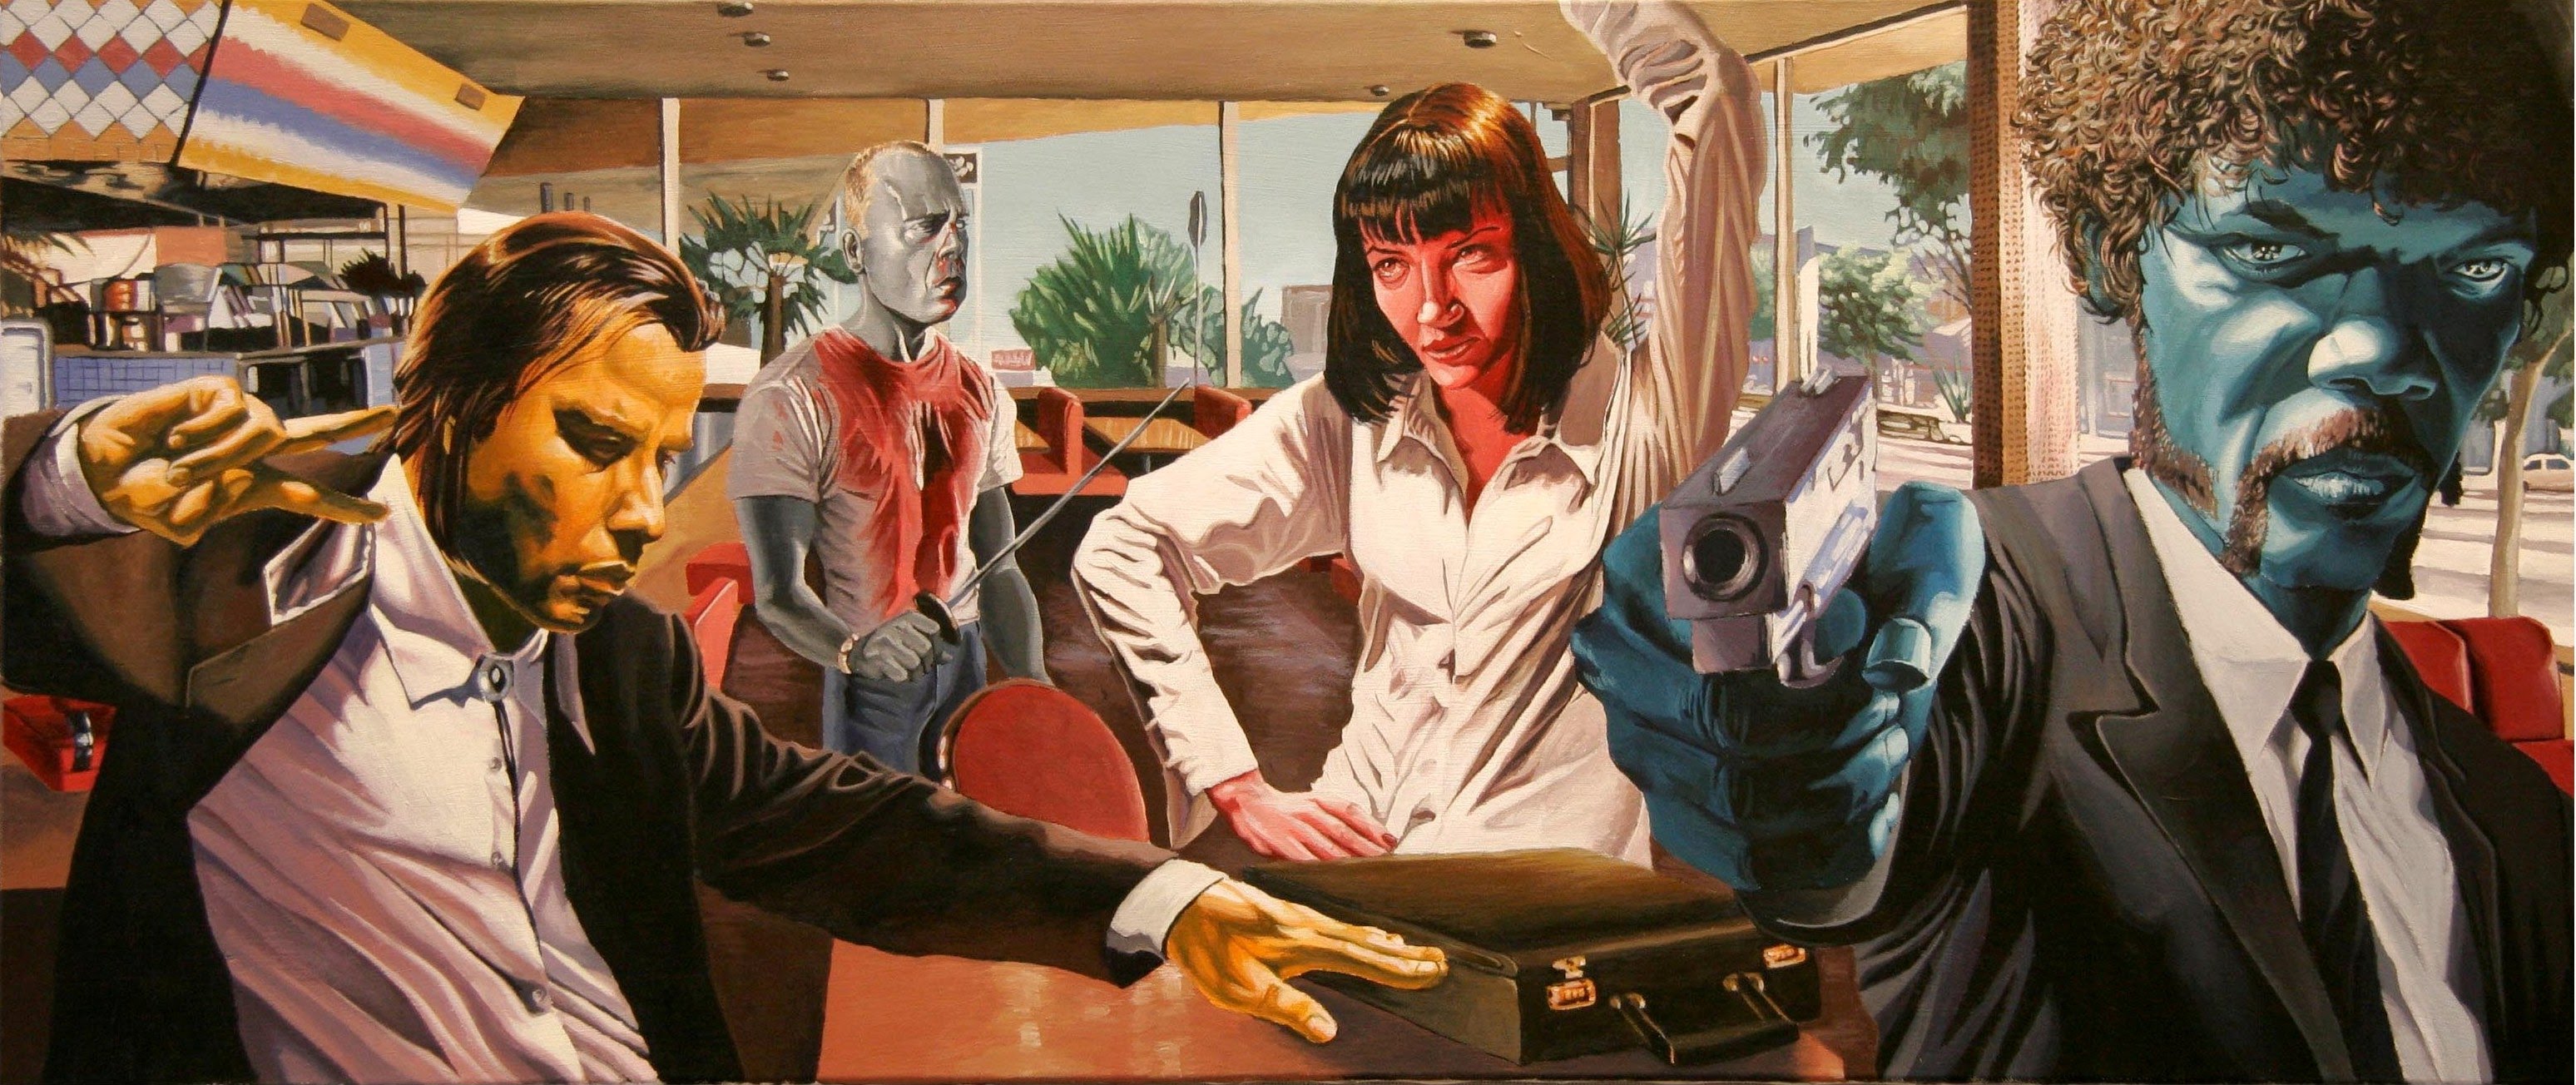 Pulp Fiction Painting At Paintingvalley Com Explore Collection Images, Photos, Reviews